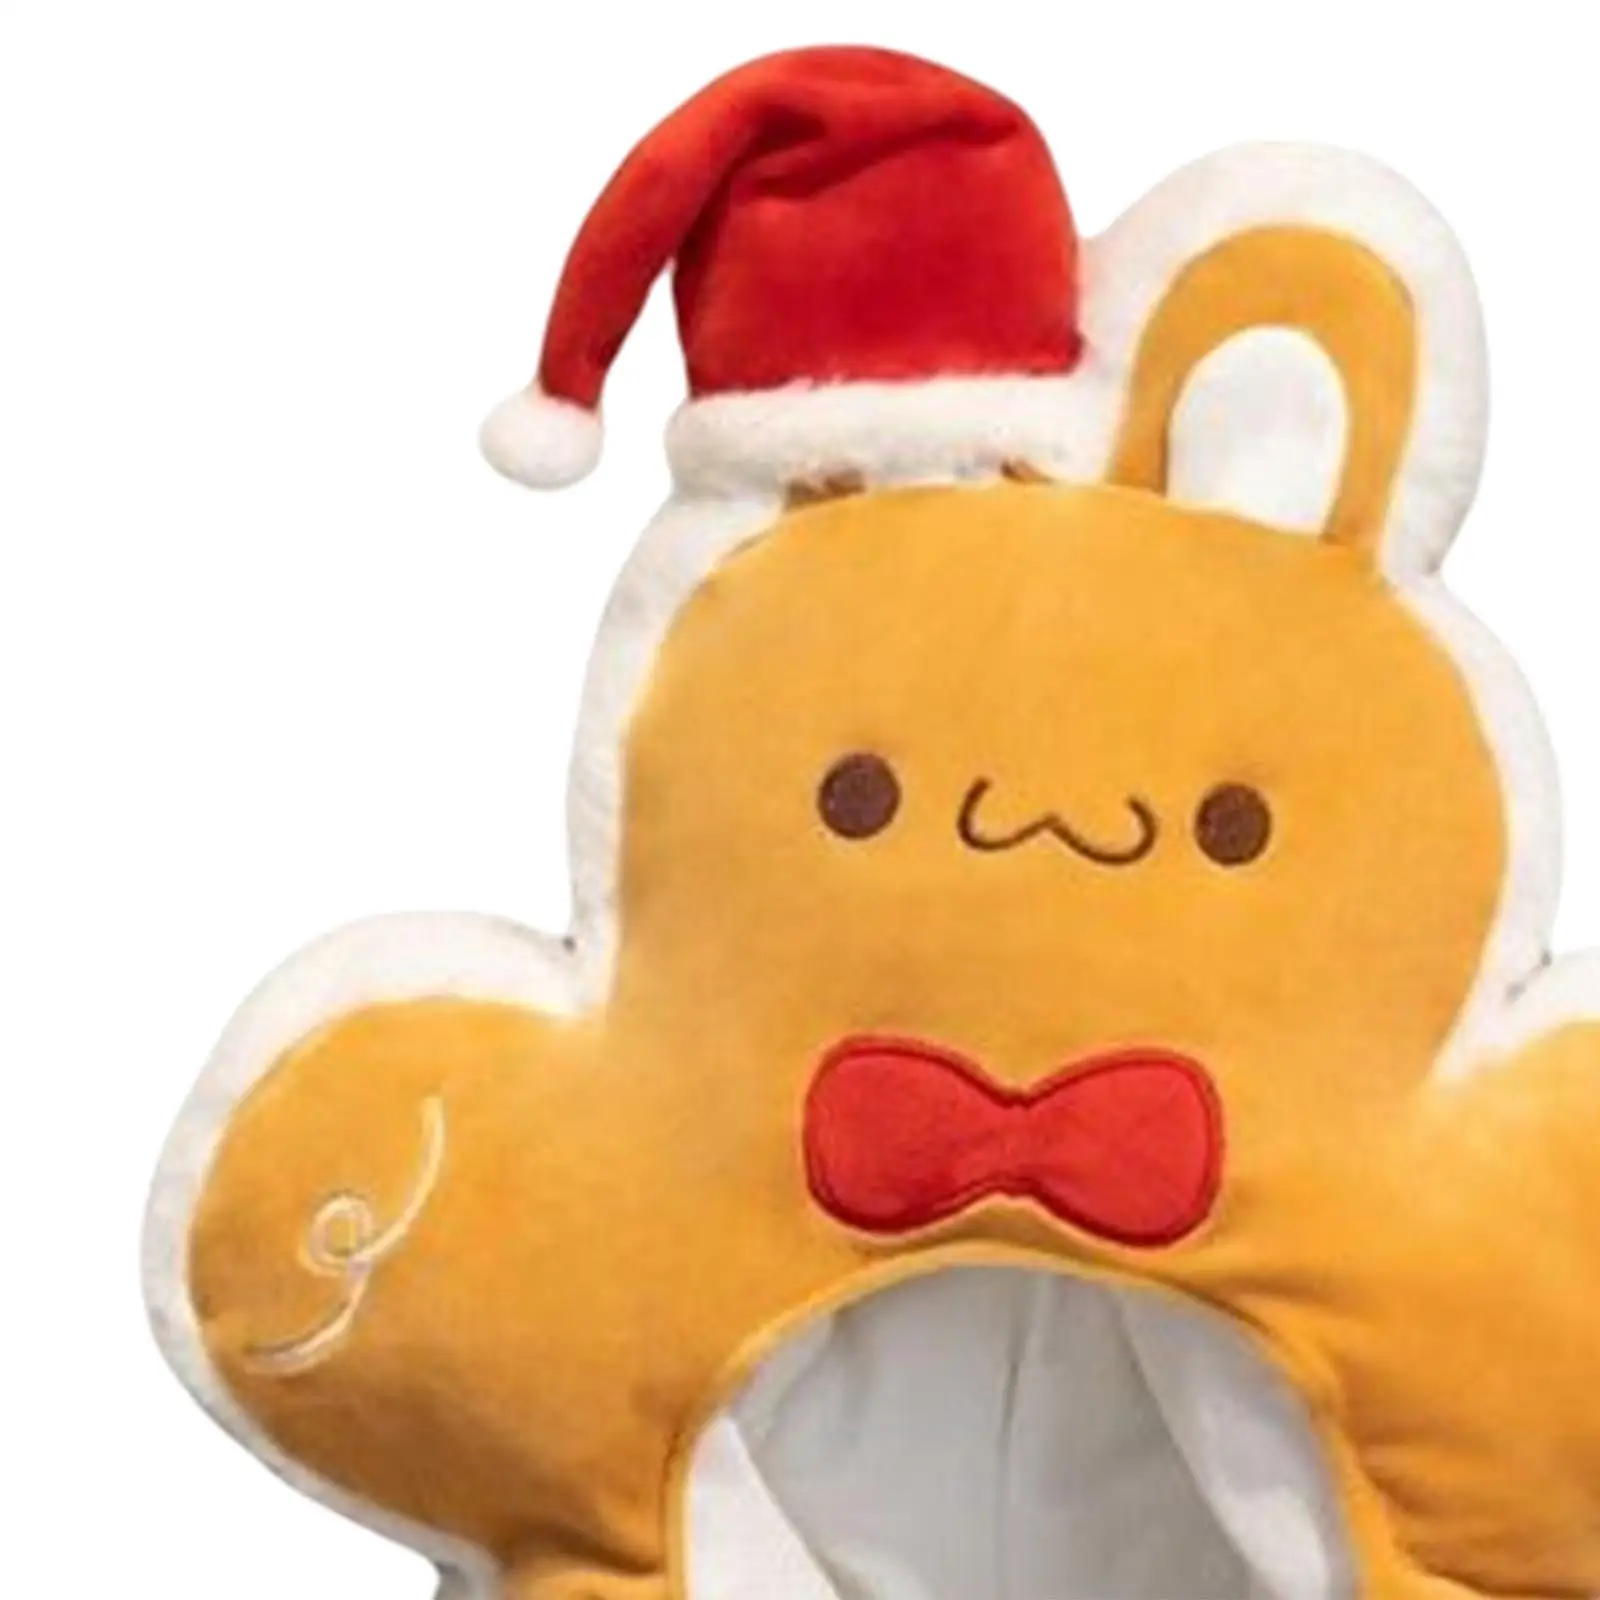 Lovely Christmas Gingerbread Rabbit Hat Creative Unisex Plush Holiday Decorations Costume for New Year Cosplay Kids Winter Xmas